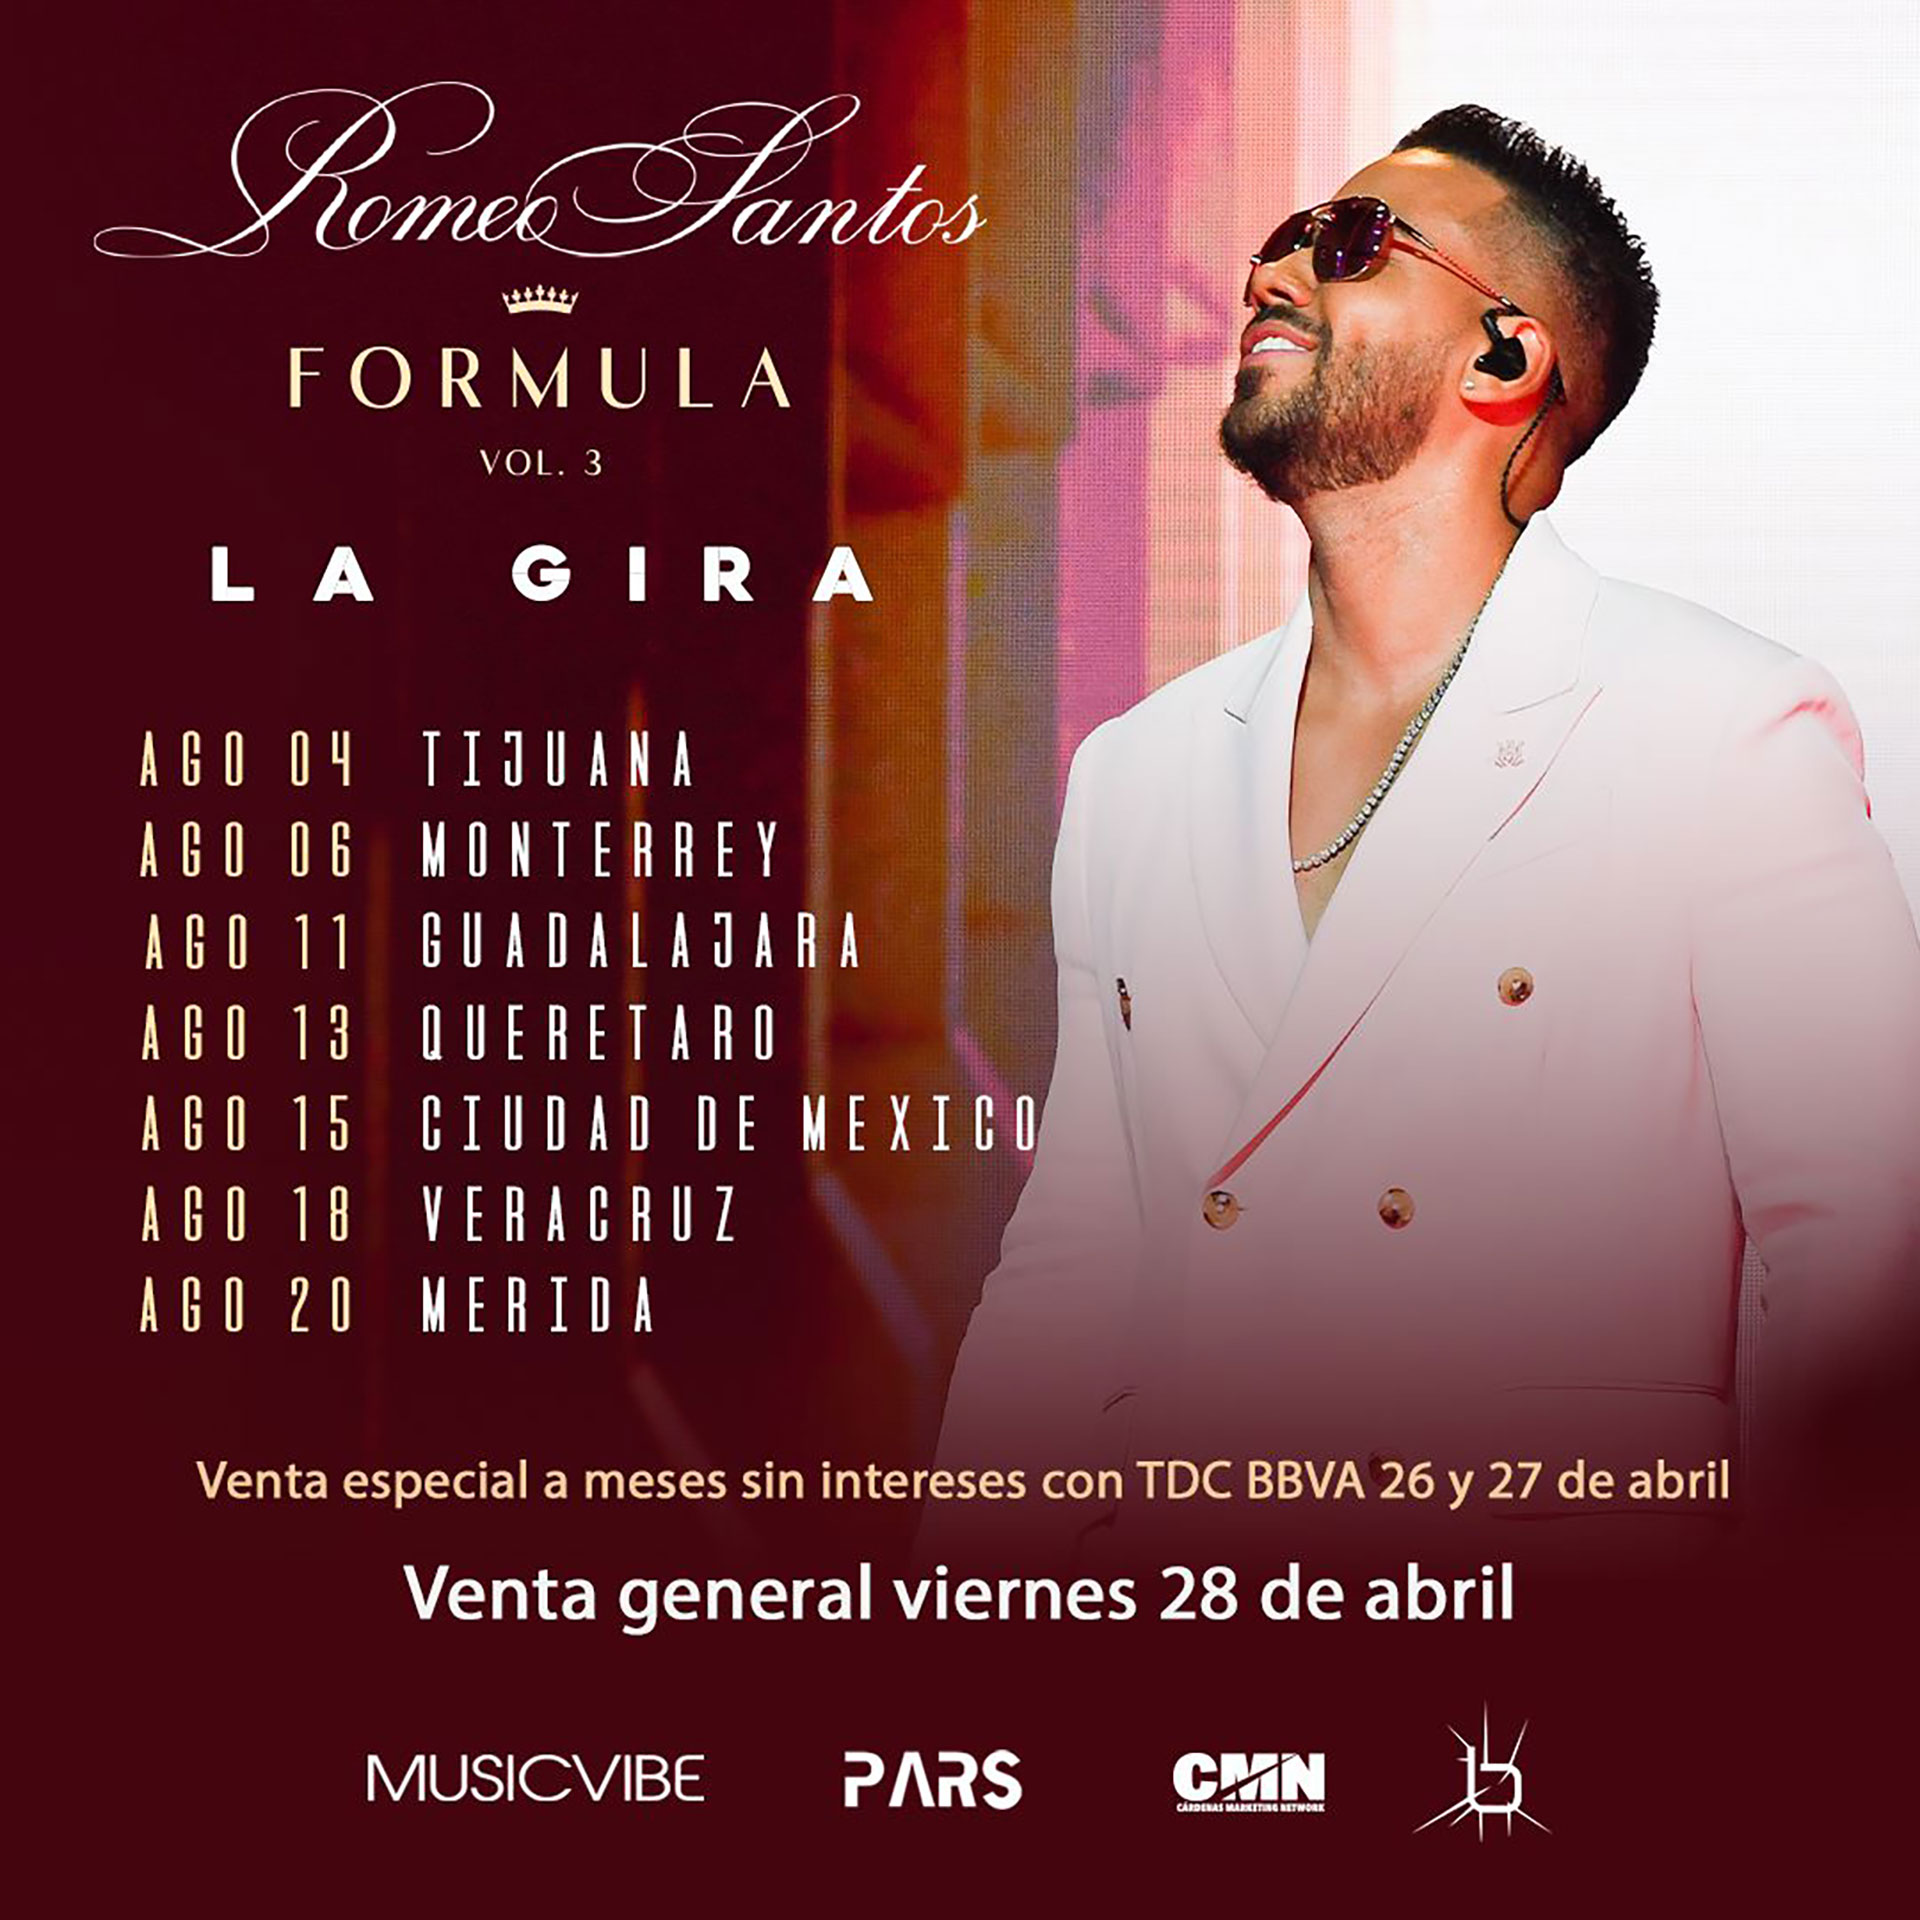 Romeo Santos announced tour in Mexico dates and when to buy tickets